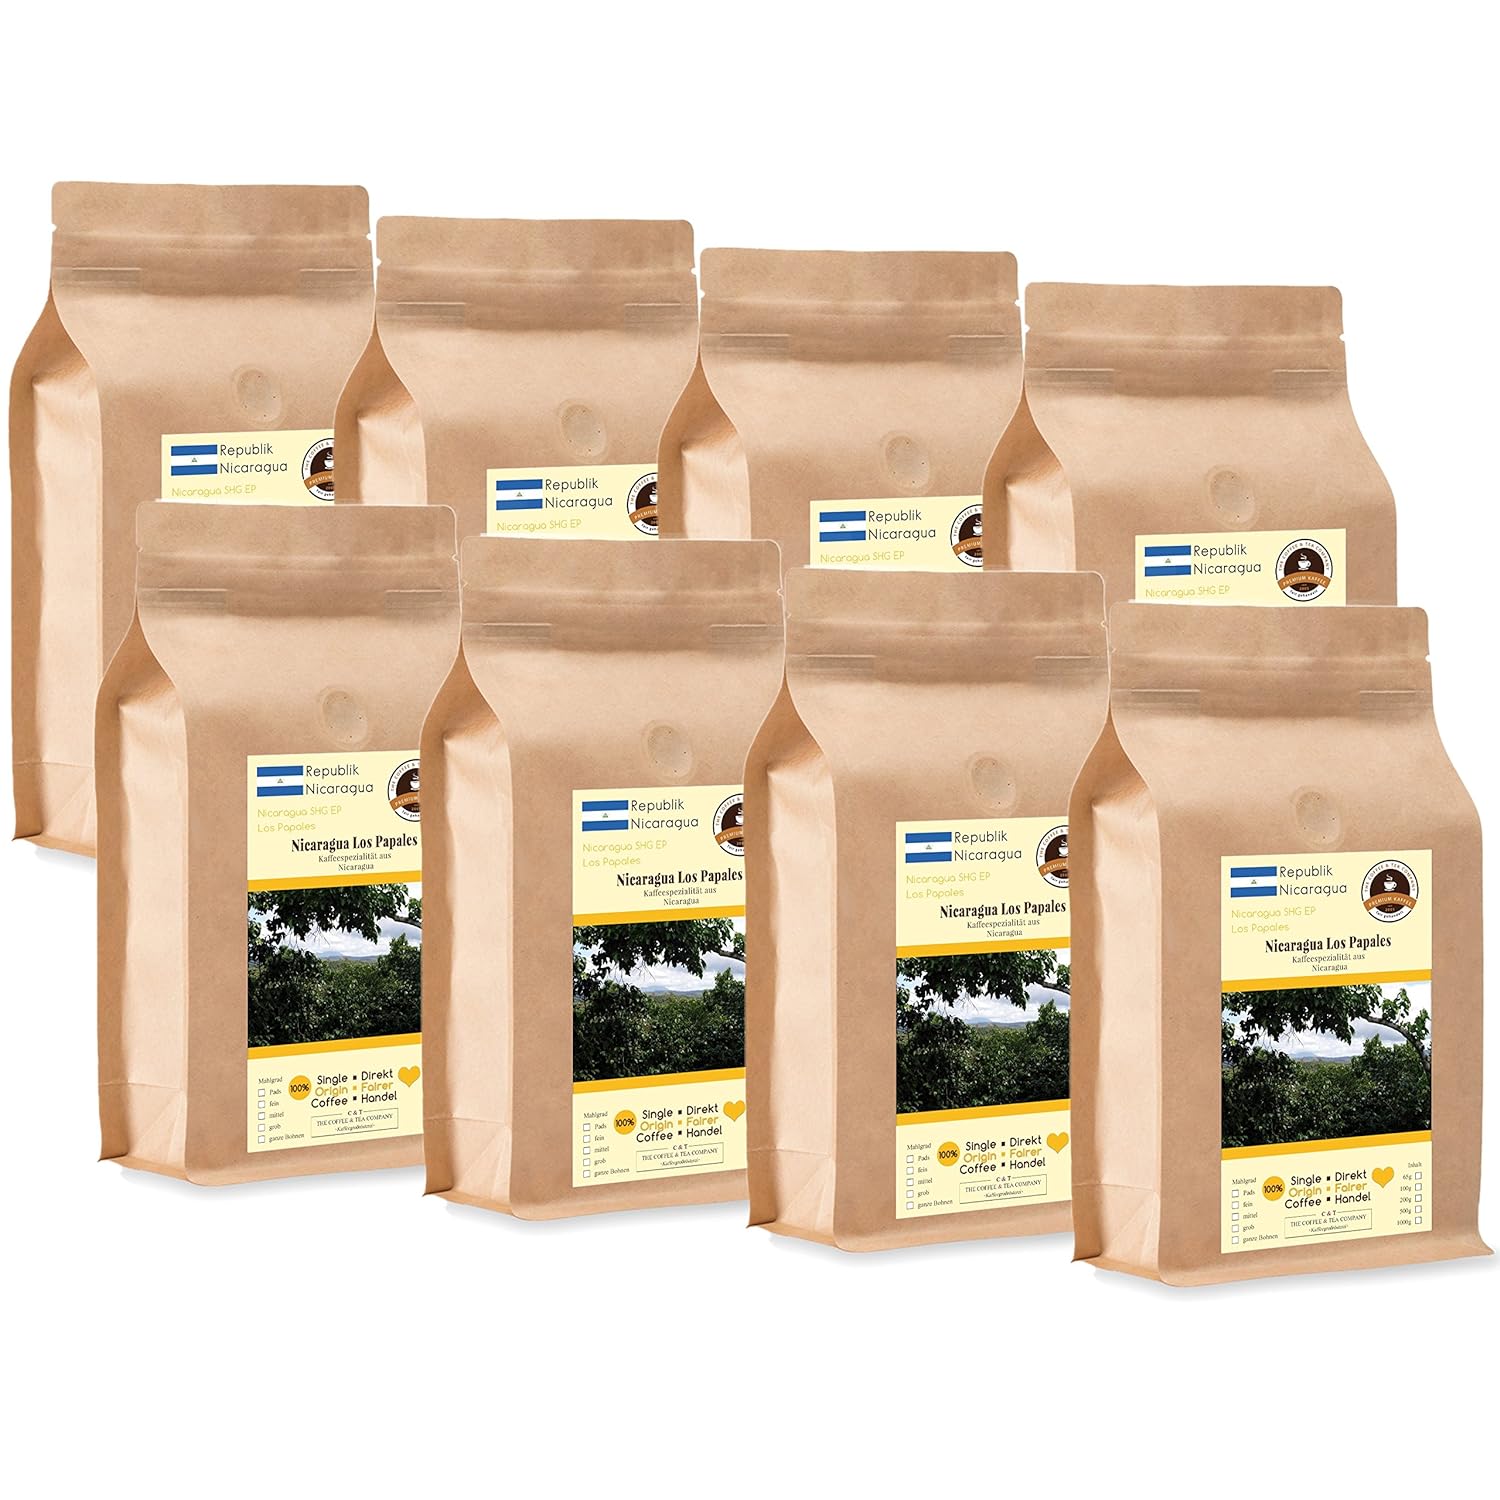 Coffee Globetrotter - Coffee with Heart - Nicaragua Los Papales - 8 x 1000 g Very Fine Ground - for Fully Automatic Coffee Grinder - Roasted Coffee Fair Trade | Gastropack Economy Pack